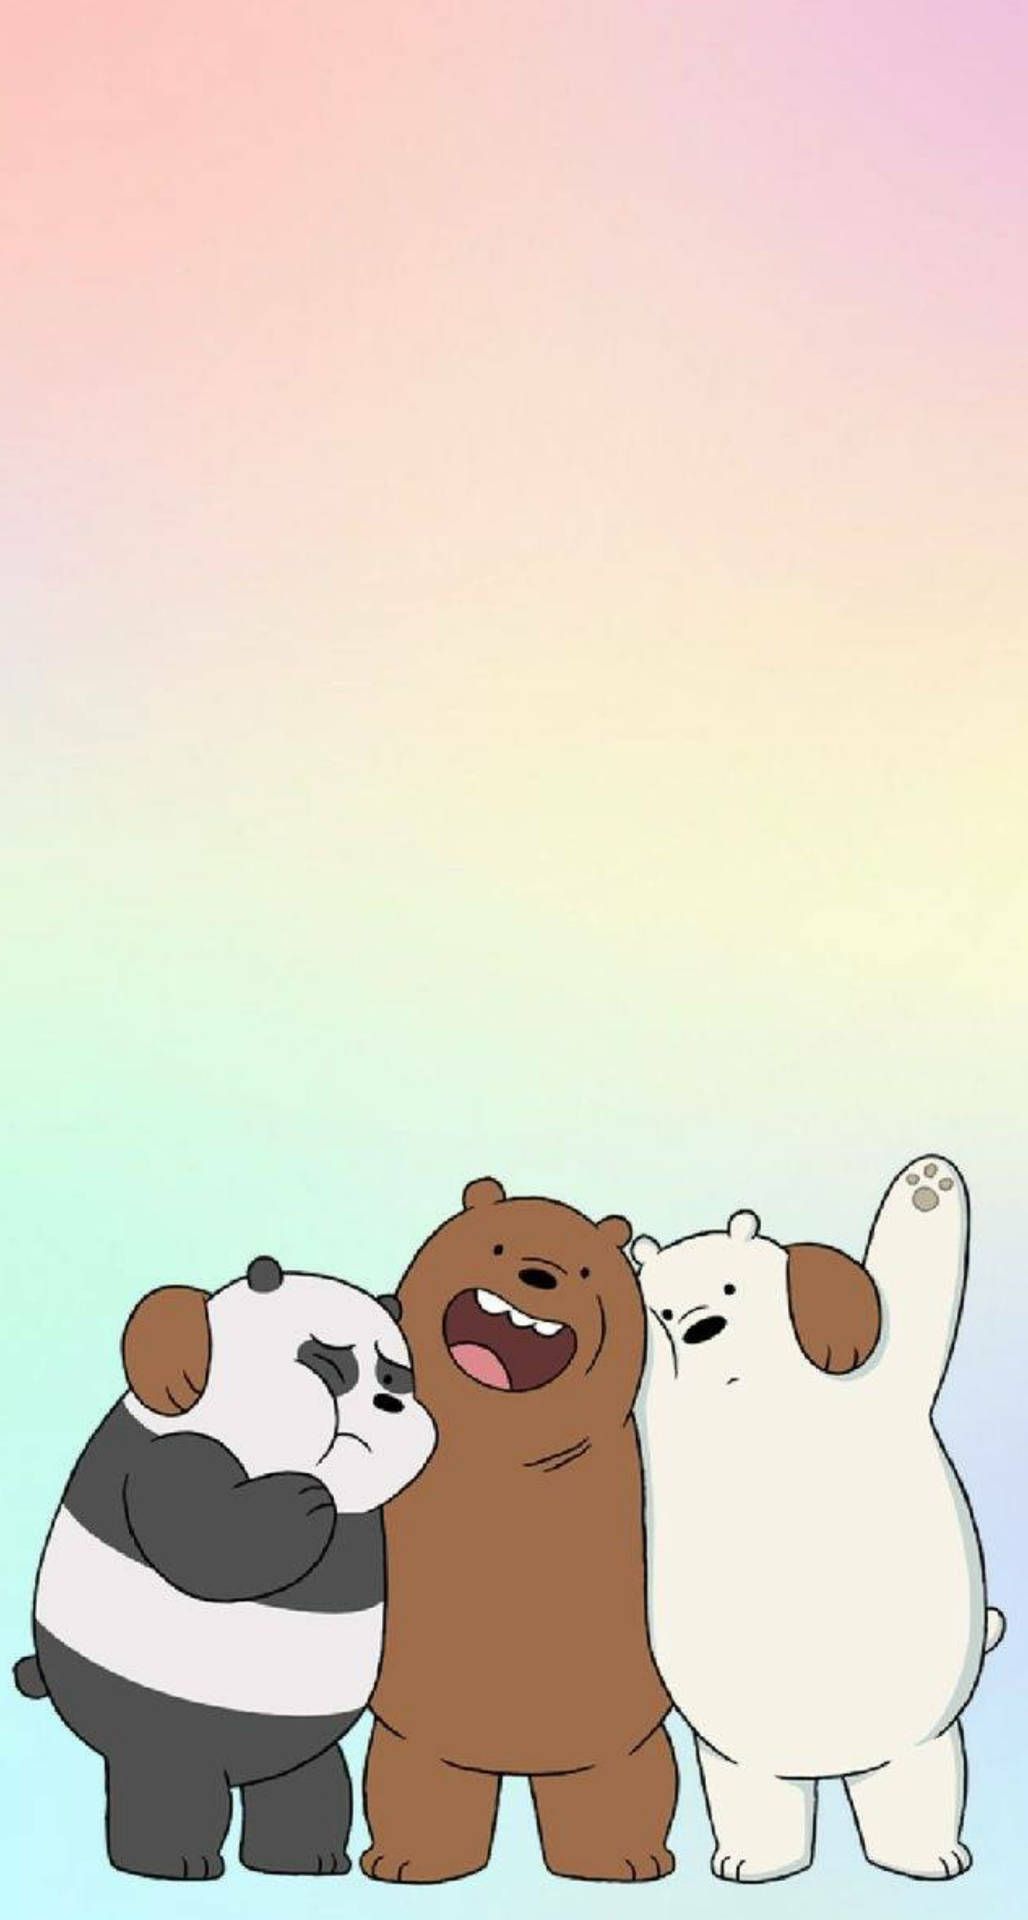 We bare bears wallpaper for phone and desktop backgrounds. - We Bare Bears